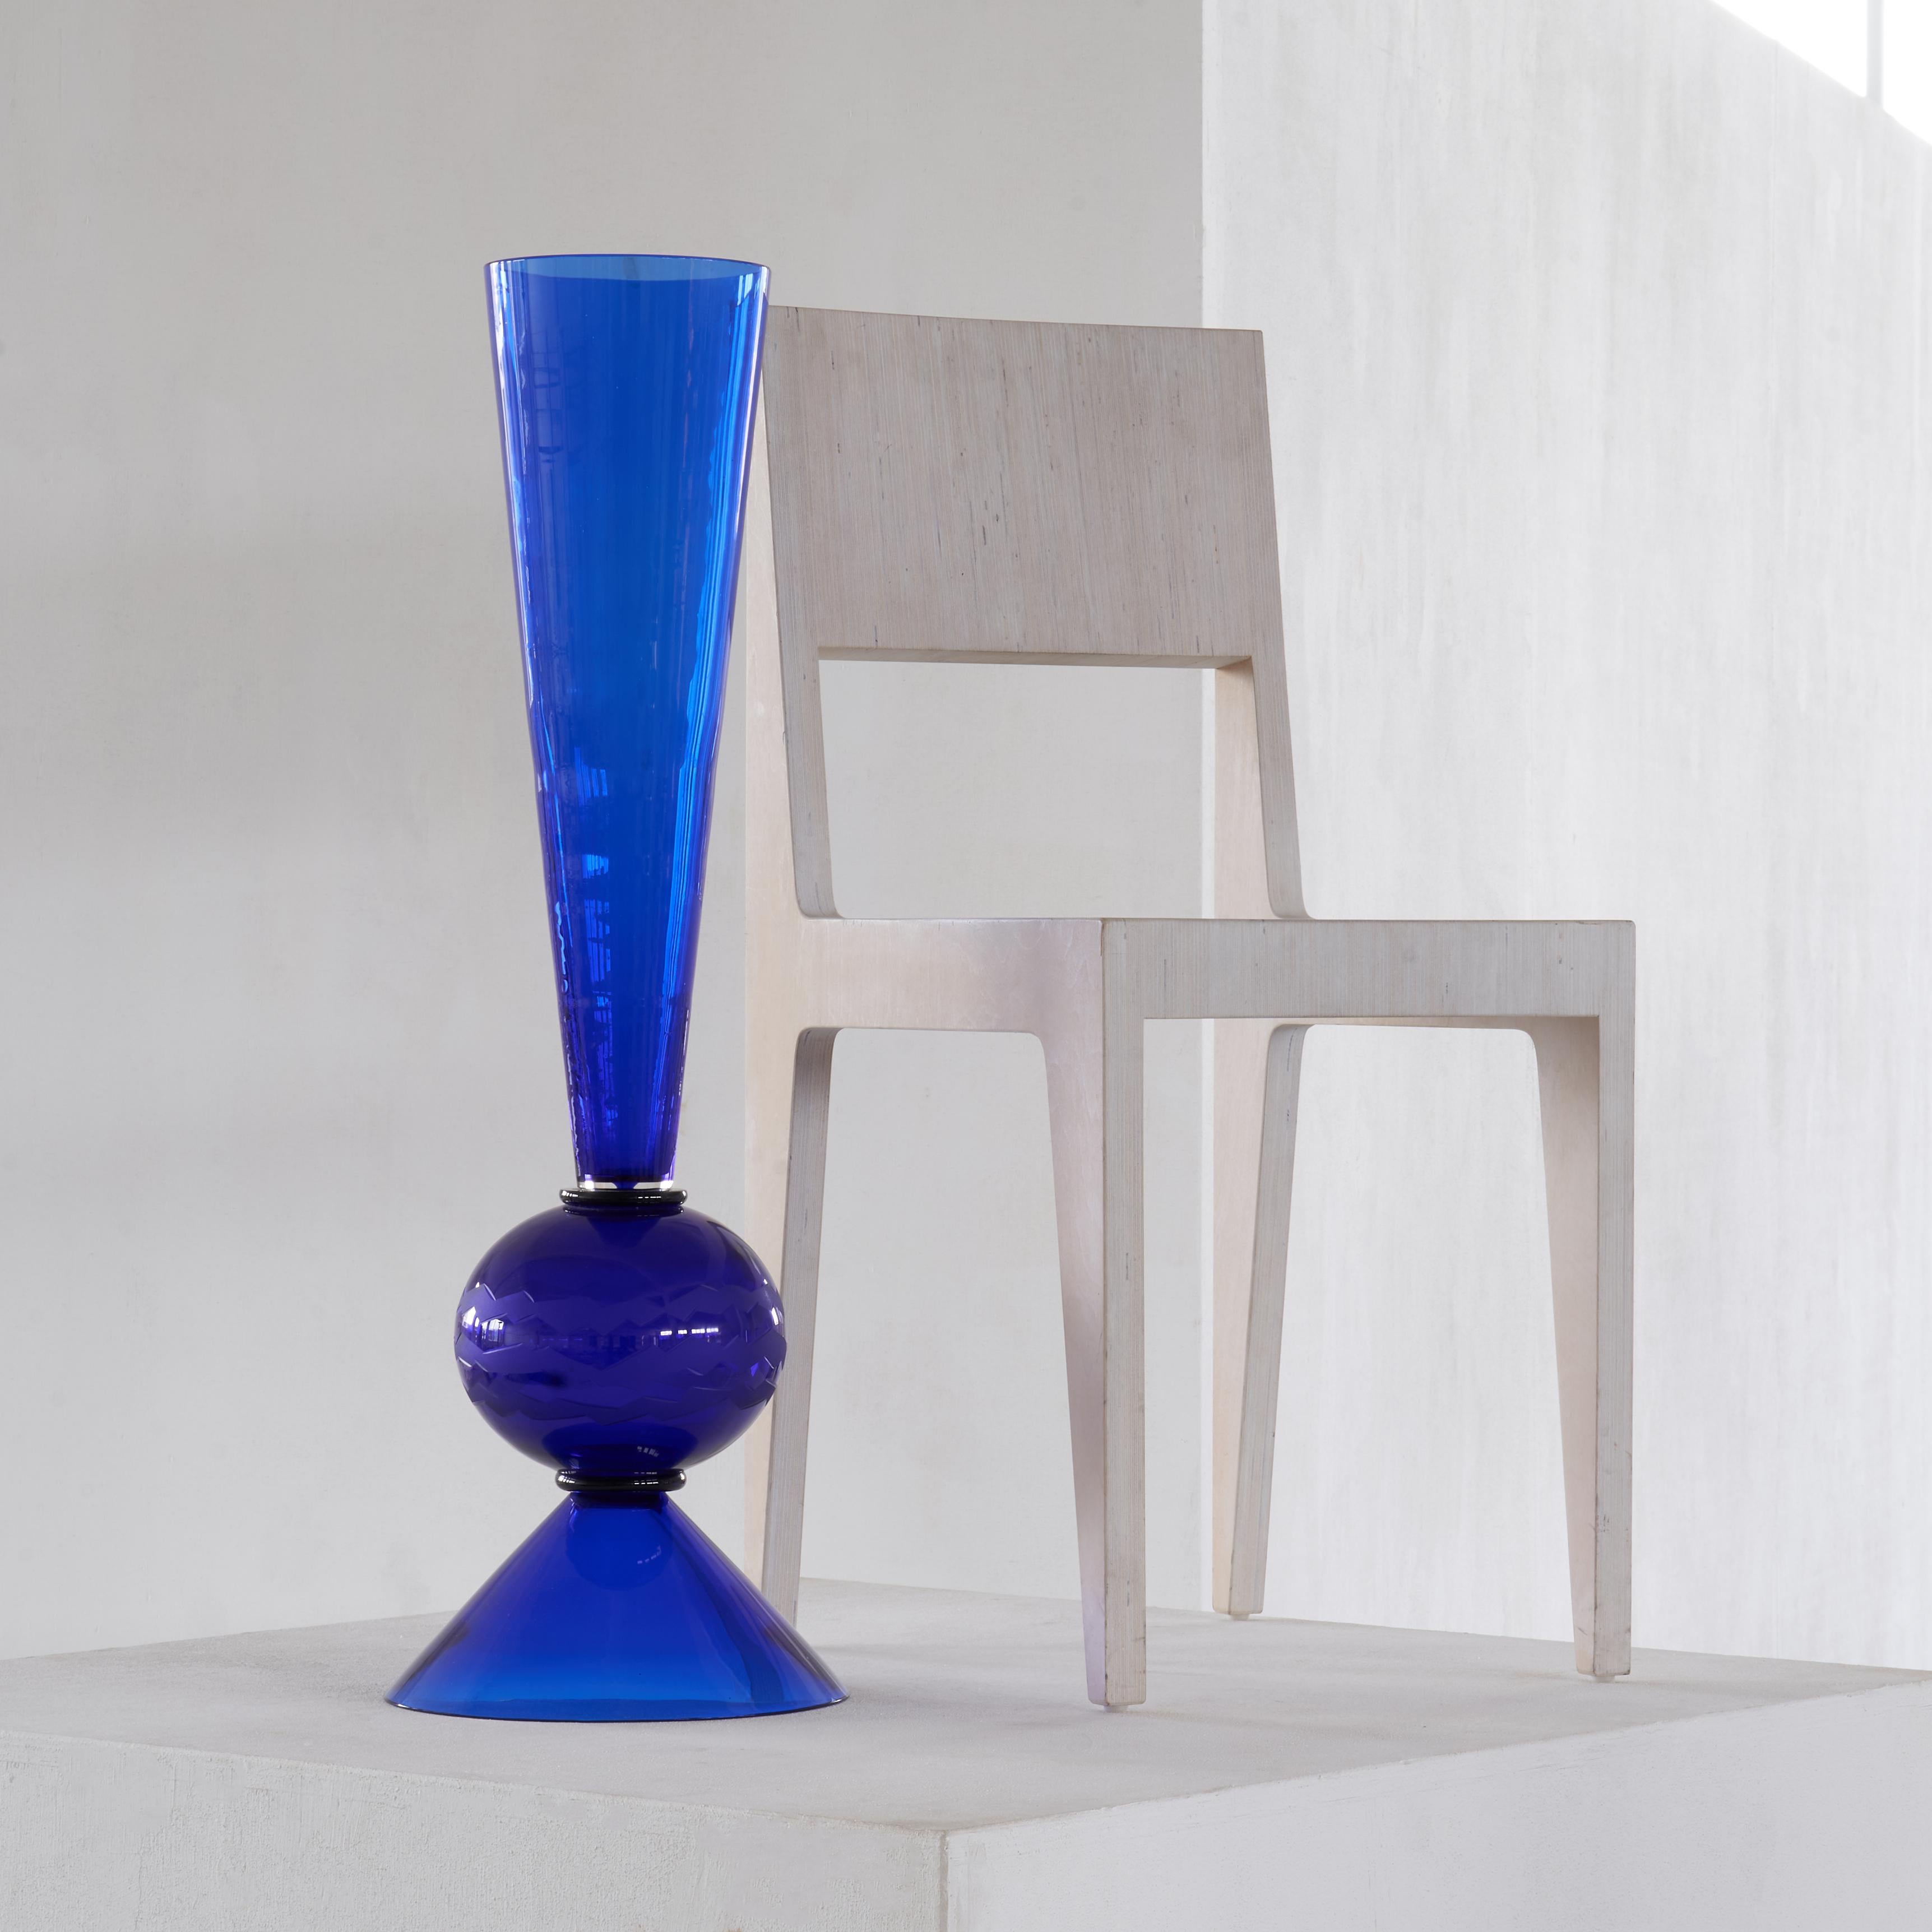 Extraordinary and very large (86cm in height) blue glass object by famous designer and Memphis Group founding member Matteo Thun (1952 – Italy). Rinascimento Collection for Tiffany & Co, made by Murano glass house Barovier&Toso in Venezia in